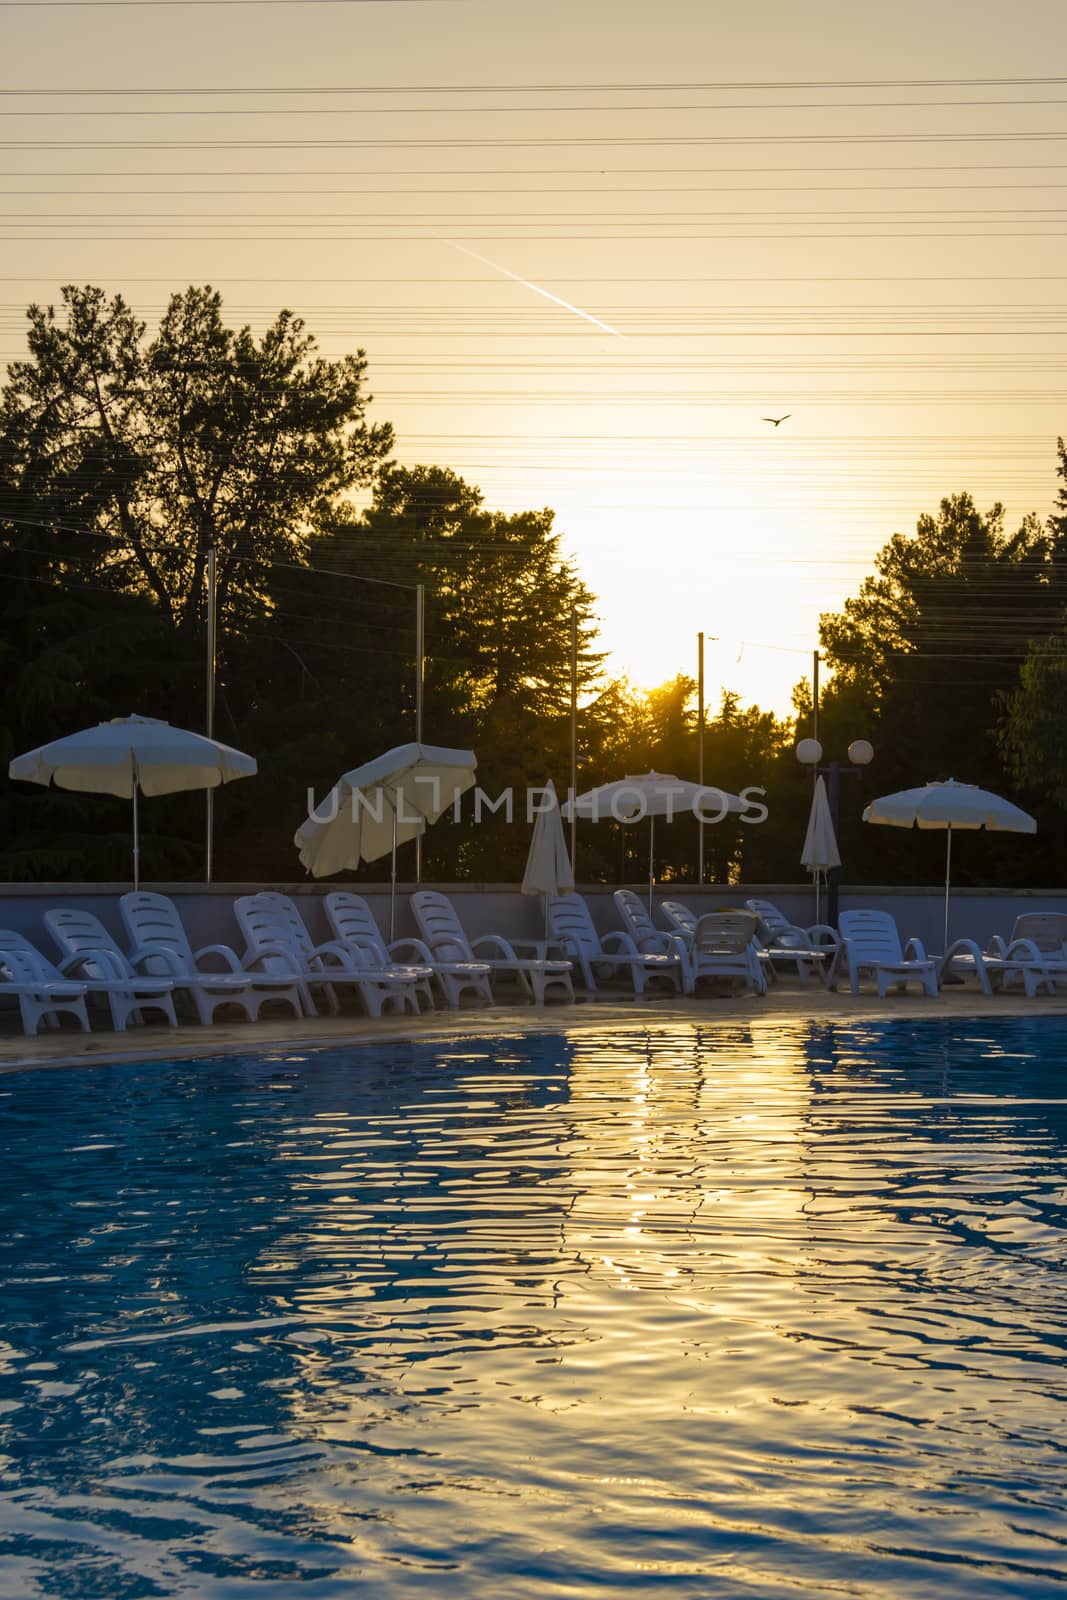 Swimming pool in the rays of the setting sun